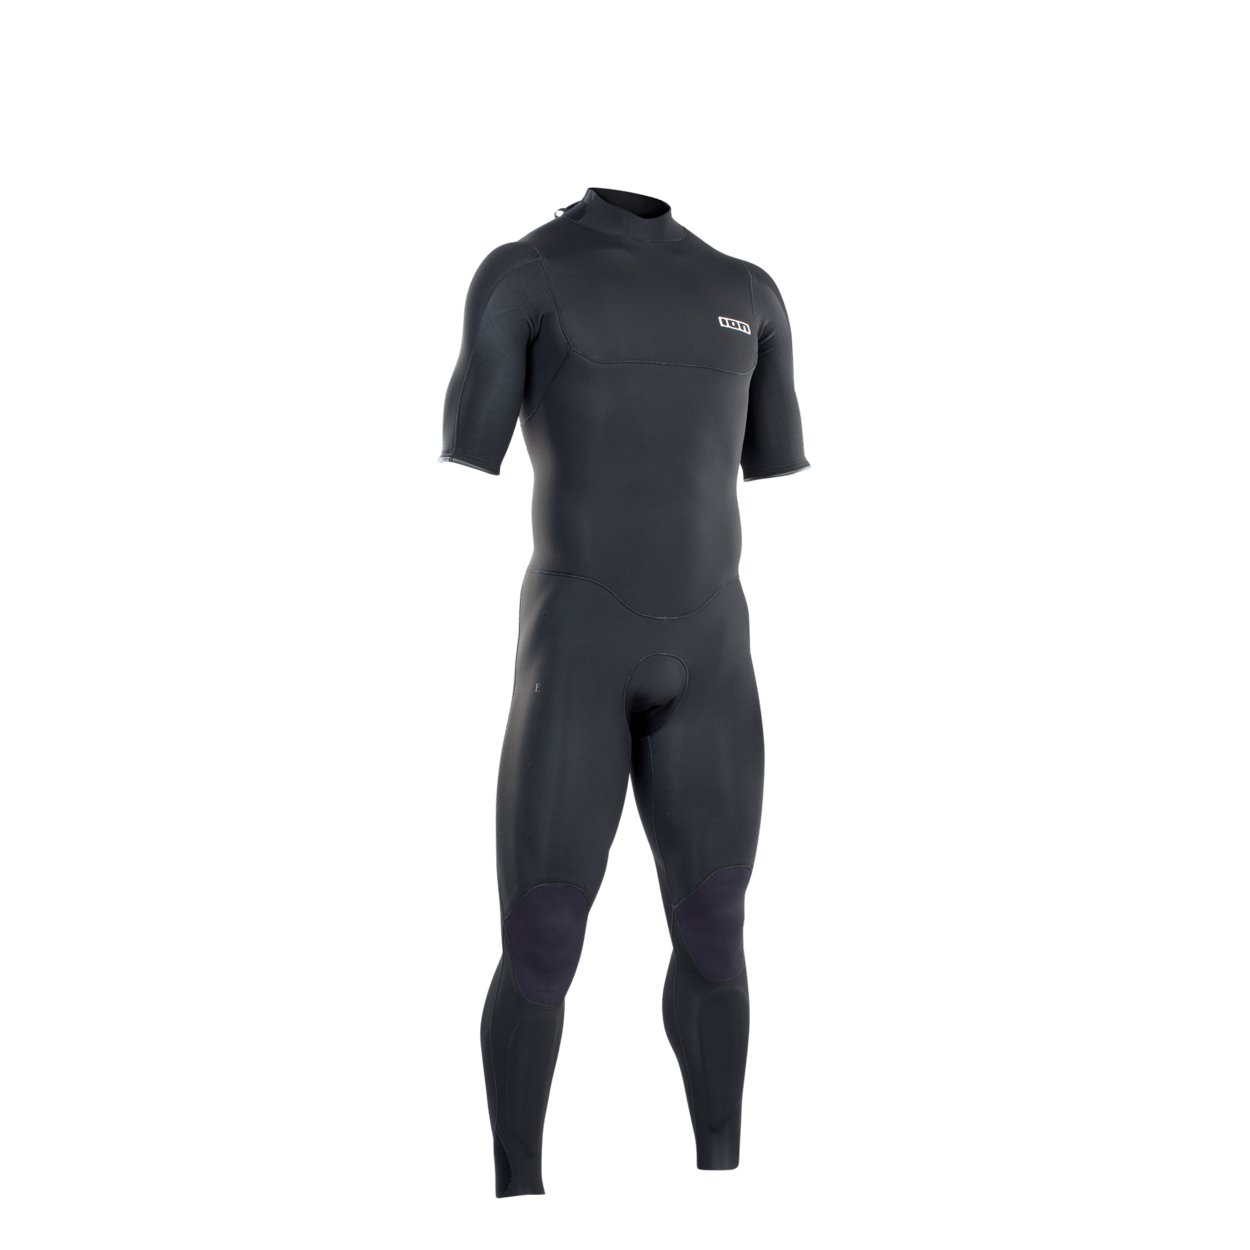 ION Seek Core Steamer SS 3/2 BZ DL 2021 - Worthing Watersports - 9008415946600 - Wetsuits - ION Water